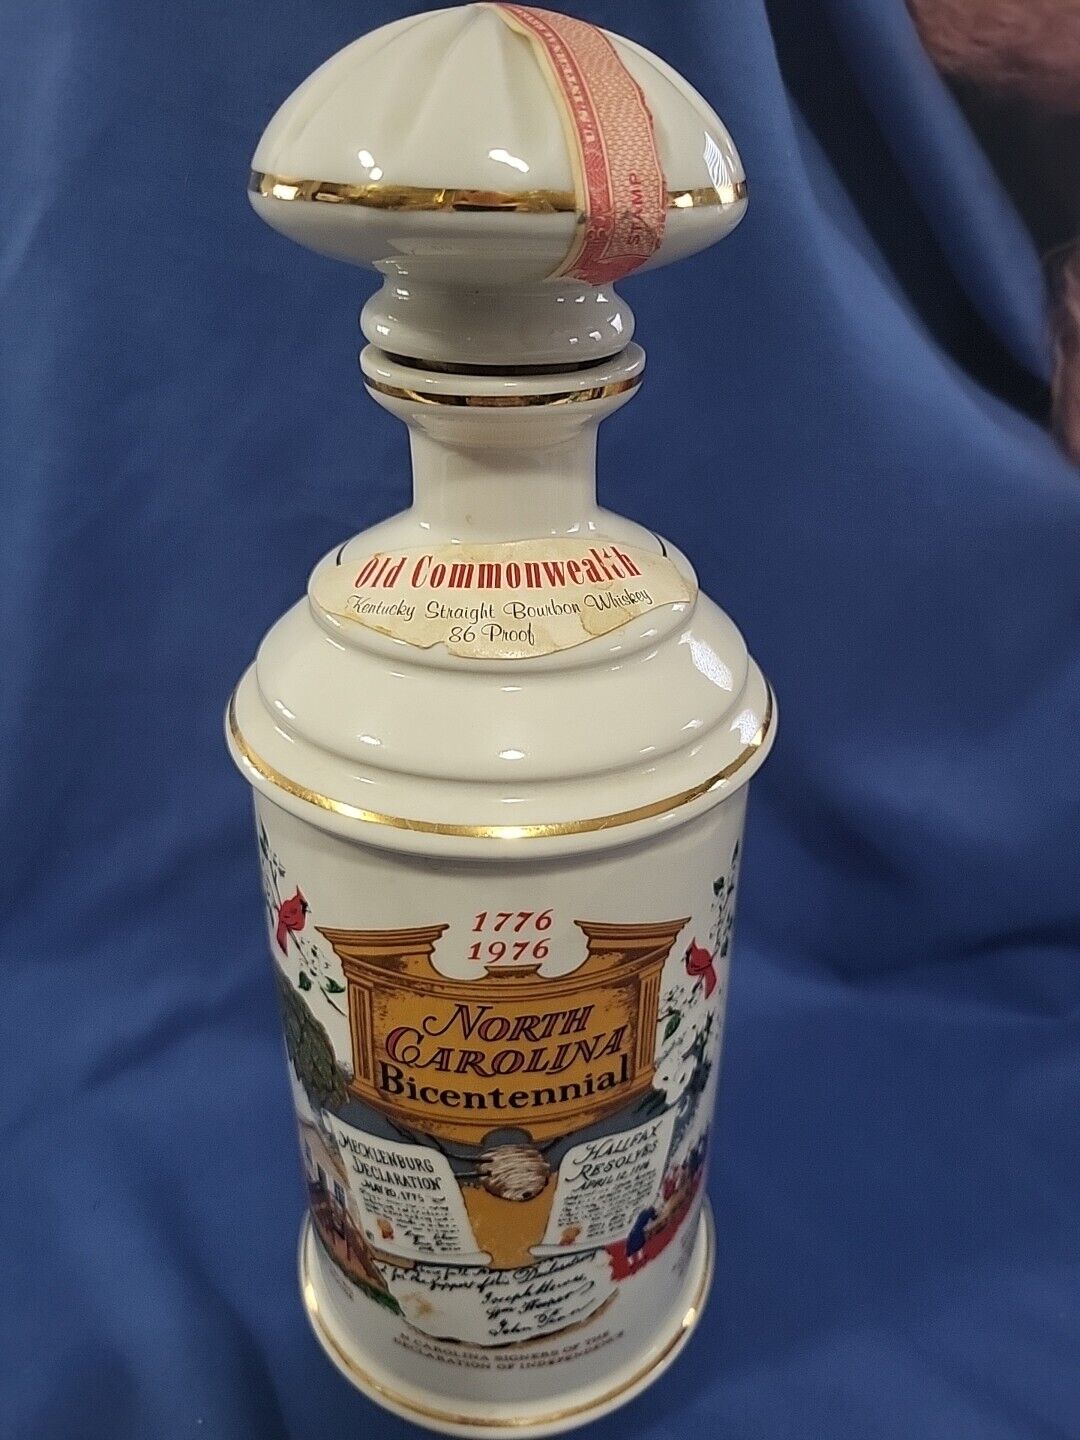 1975 Old Common Wealth Bicentennial Decantor, \